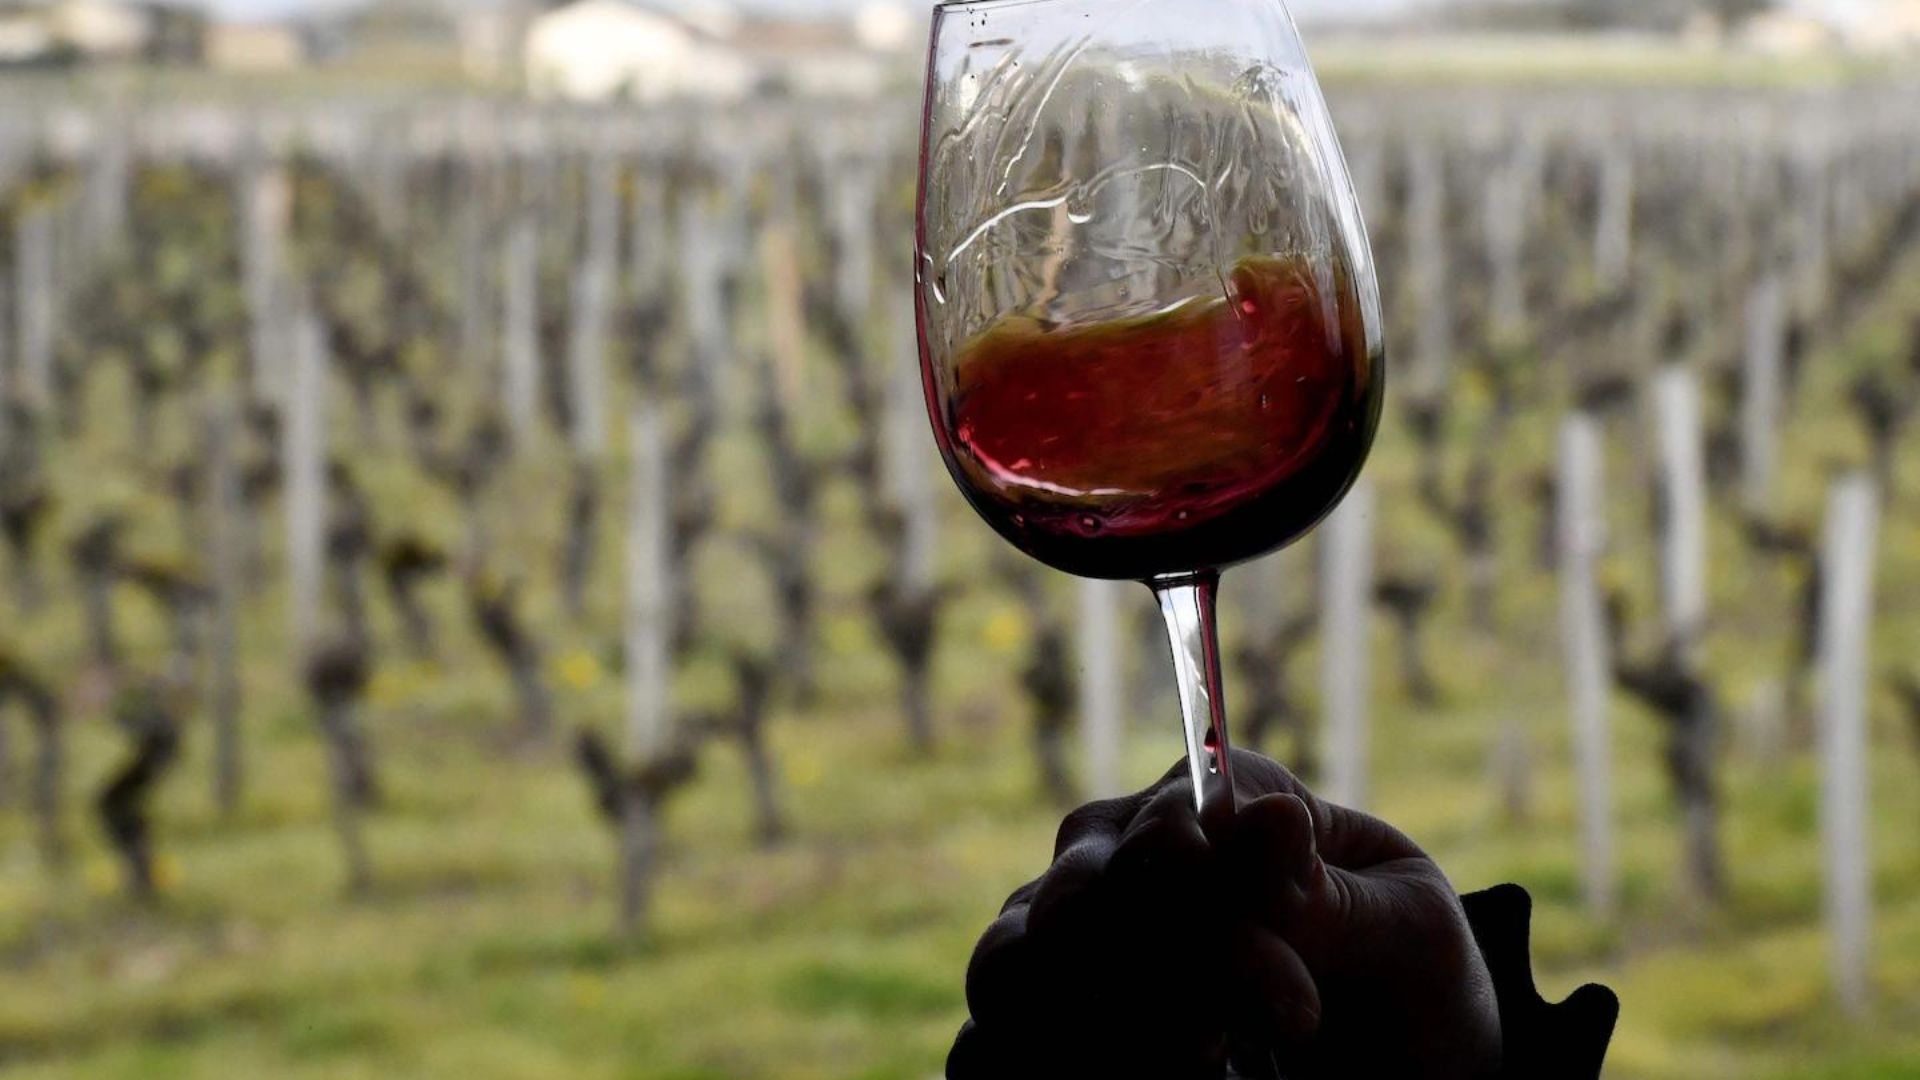 Global Warming Is Reshaping the Wine Industry